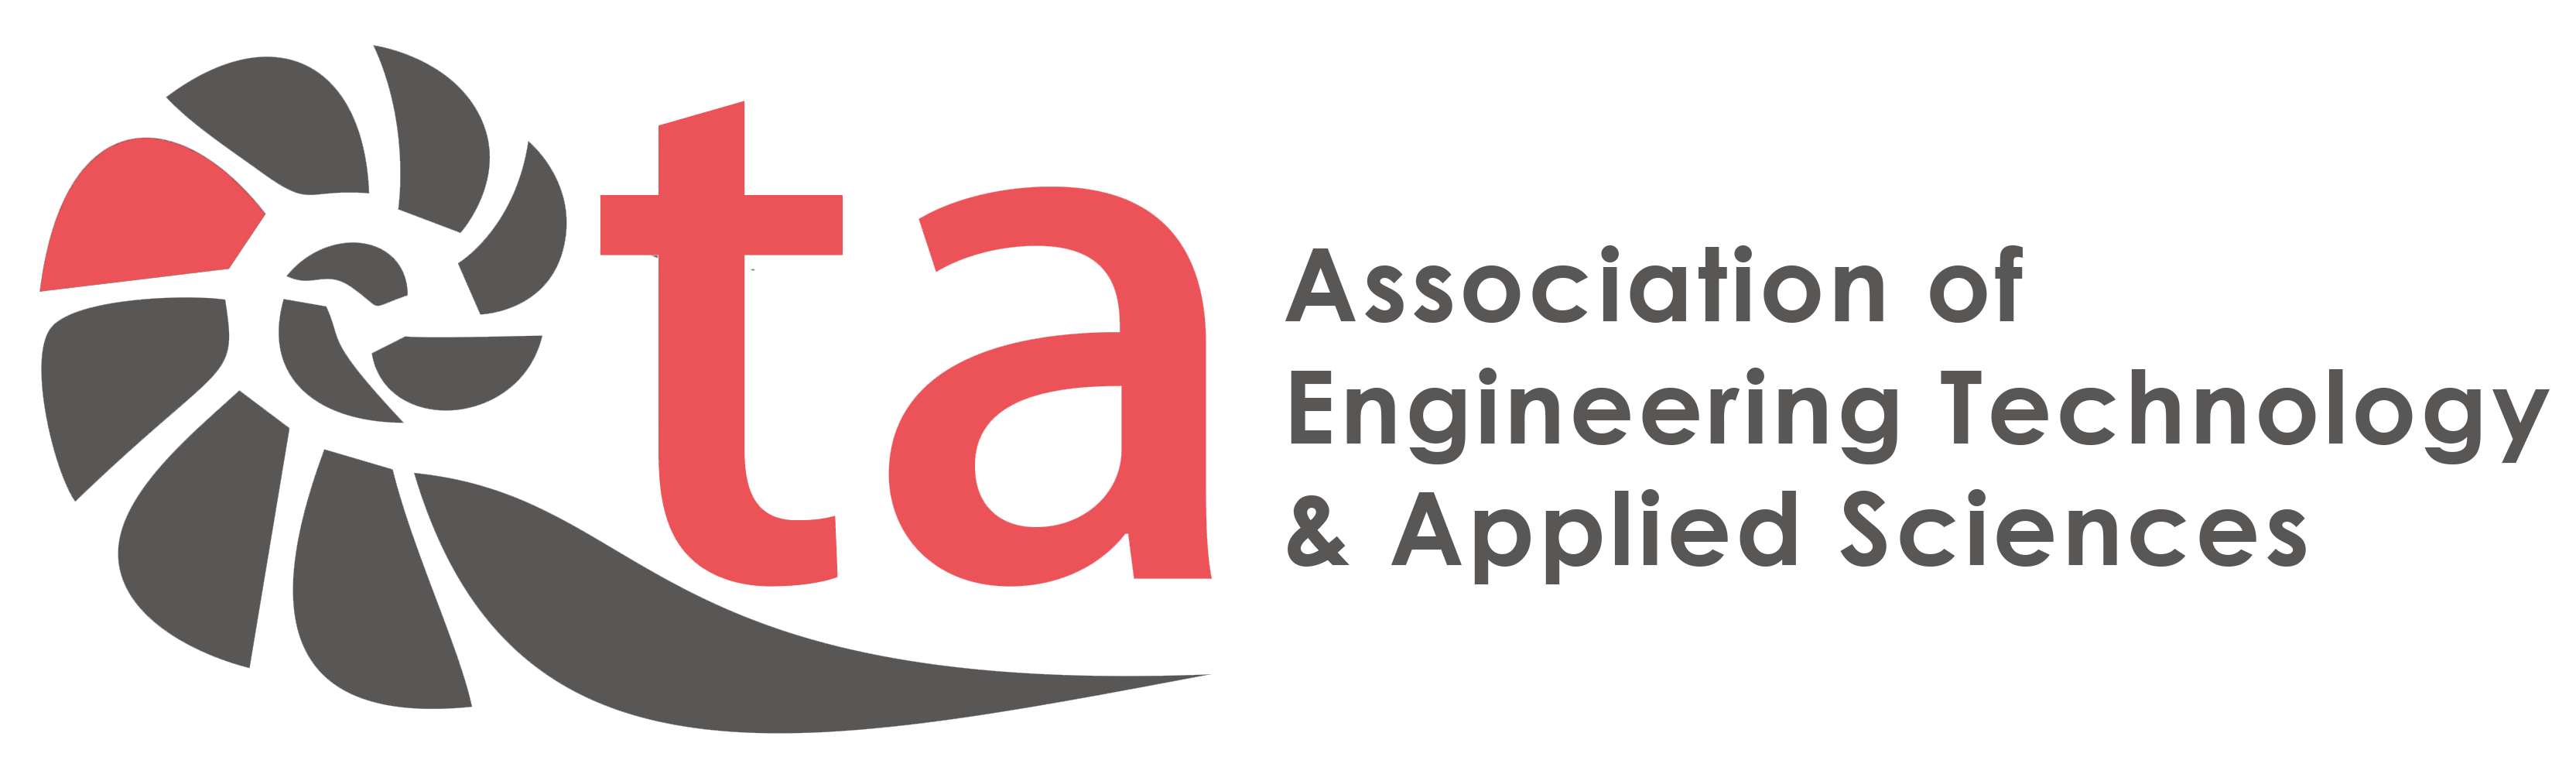 AETA International Conference on Engineering and Technology, Smart Materials, Applied Sciences, Telecommunications & Big Data ESAB